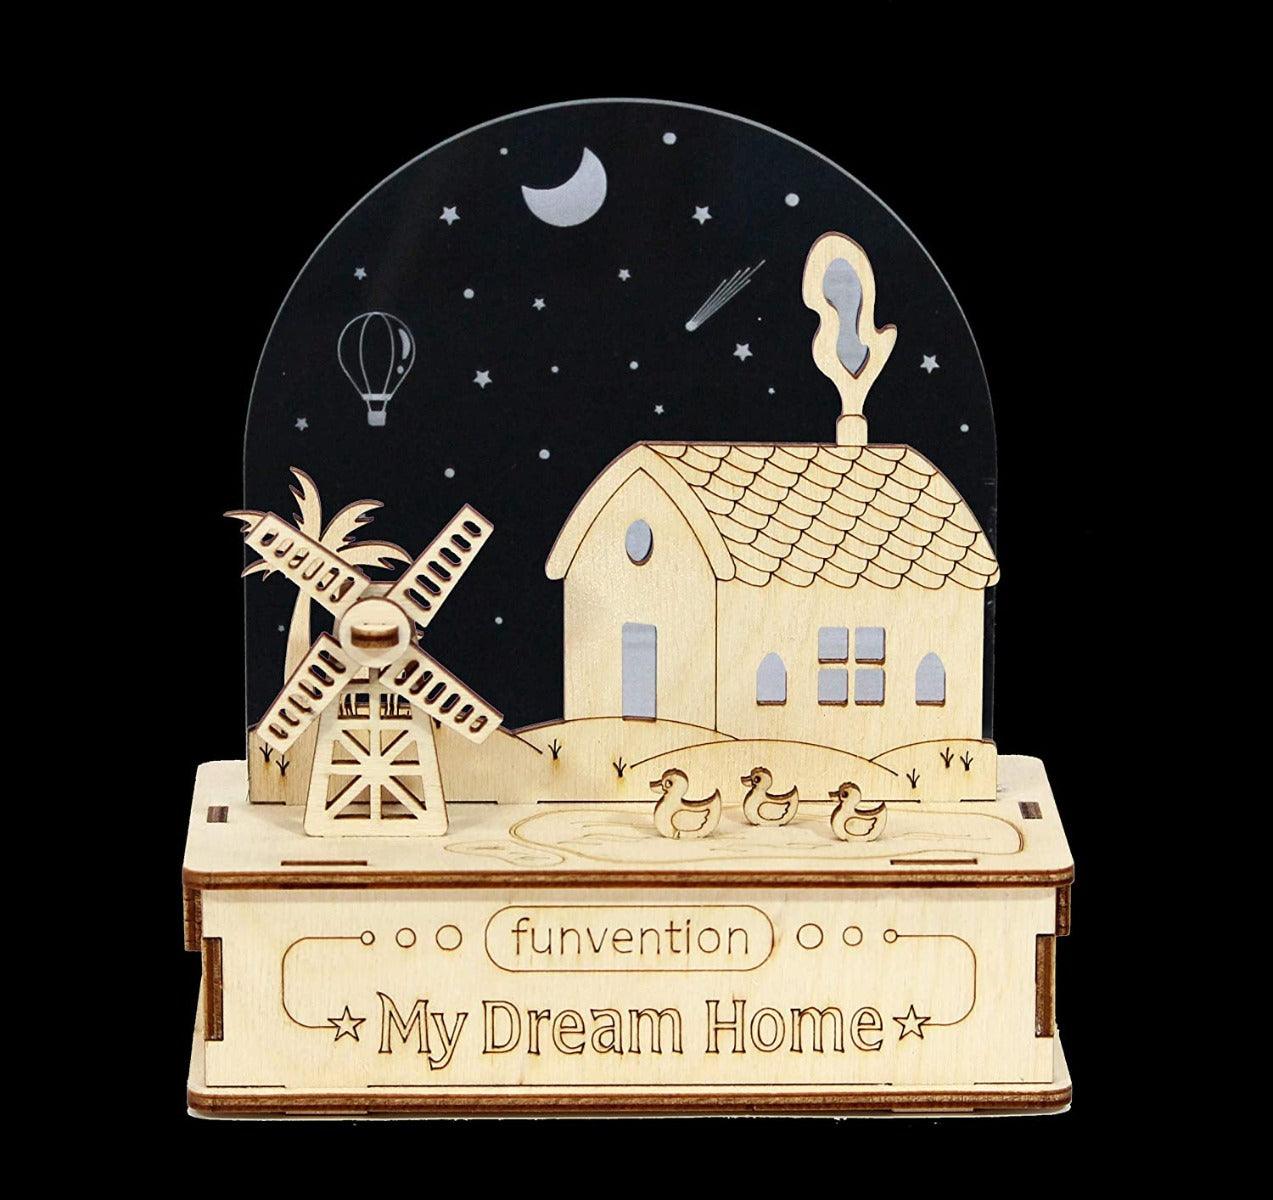 Funvention 3D Holographic Lamp - My Dream Home - STEM Learning Kit